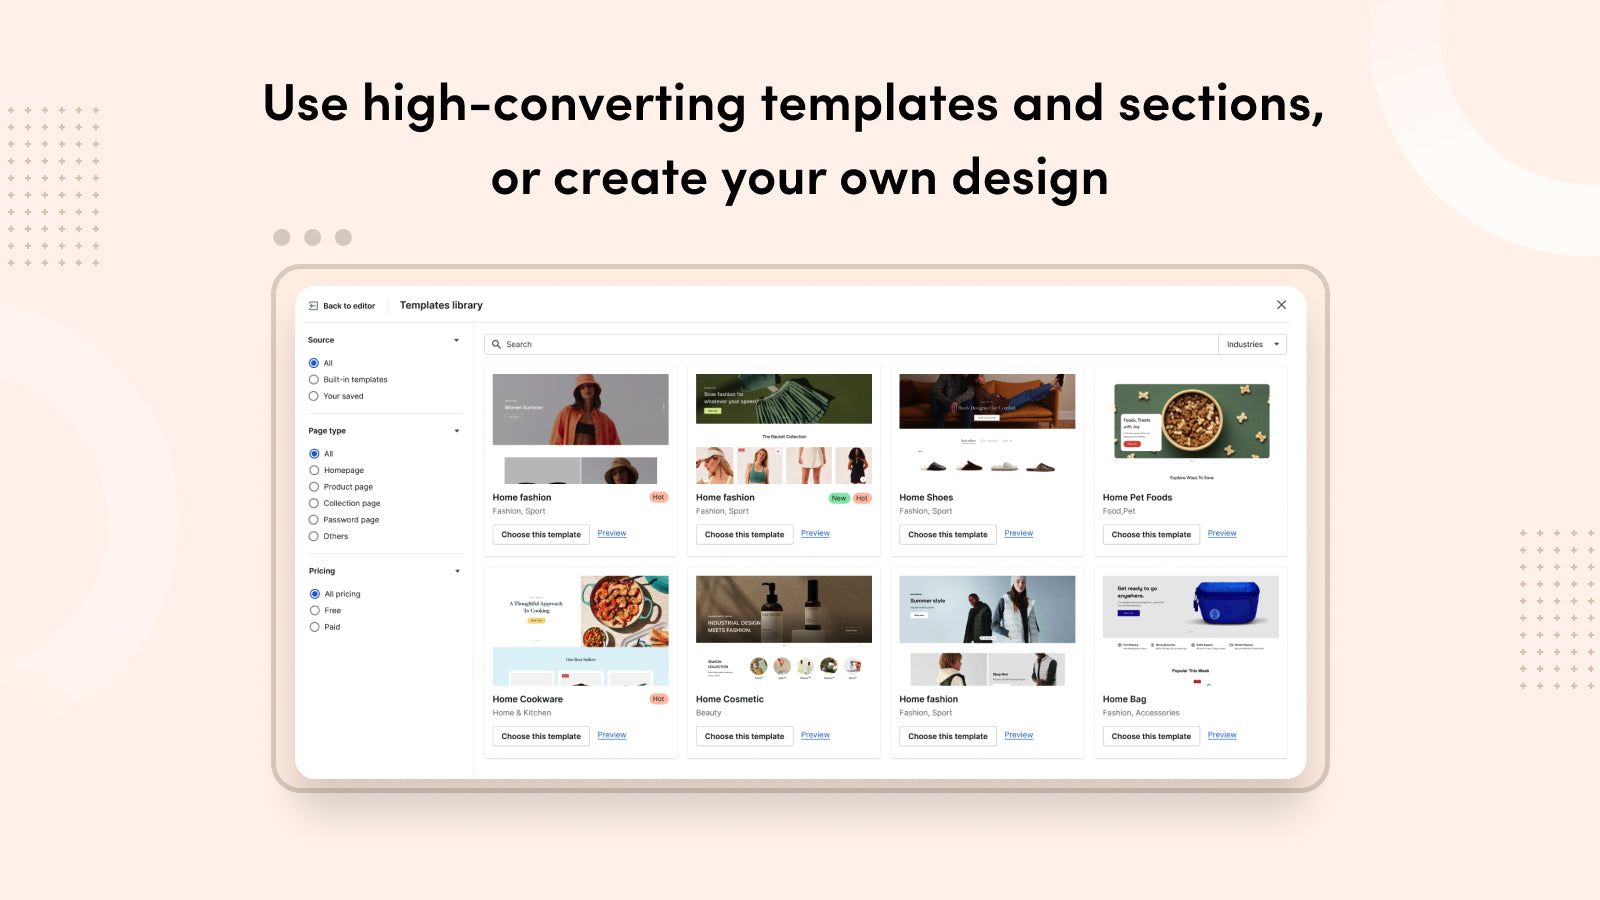 Use high-converting templates and sections